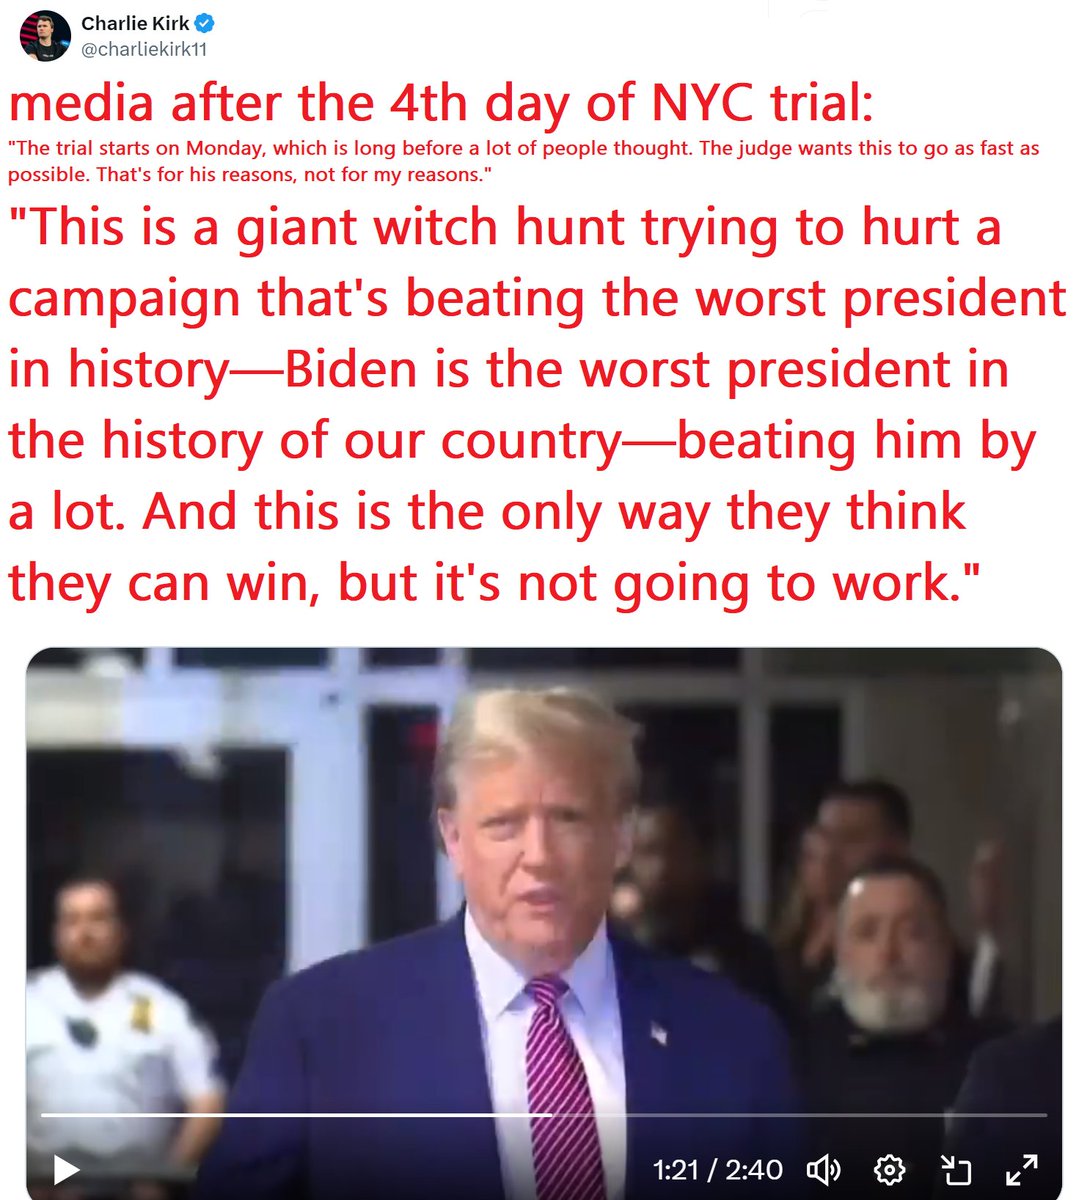 🇺🇸❤️PATRIOT FOLLOW TRAIN❤️🇺🇸 🇺🇸❤️HAPPY RED FRIDAY EVENING !❤️🇺🇸 🇺🇸❤️DROP YOUR HANDLES ❤️🇺🇸 🇺🇸❤️FOLLOW OTHER PATRIOTS❤️🇺🇸 🔥❤️LIKE & RETWEET IFBAP❤️🔥 🇺🇸❤️PRAY FOR TRUMP❤️🇺🇸 JUST IN—Donald Trump speaks to the media after the 4th day of NYC trial: 'The trial starts on